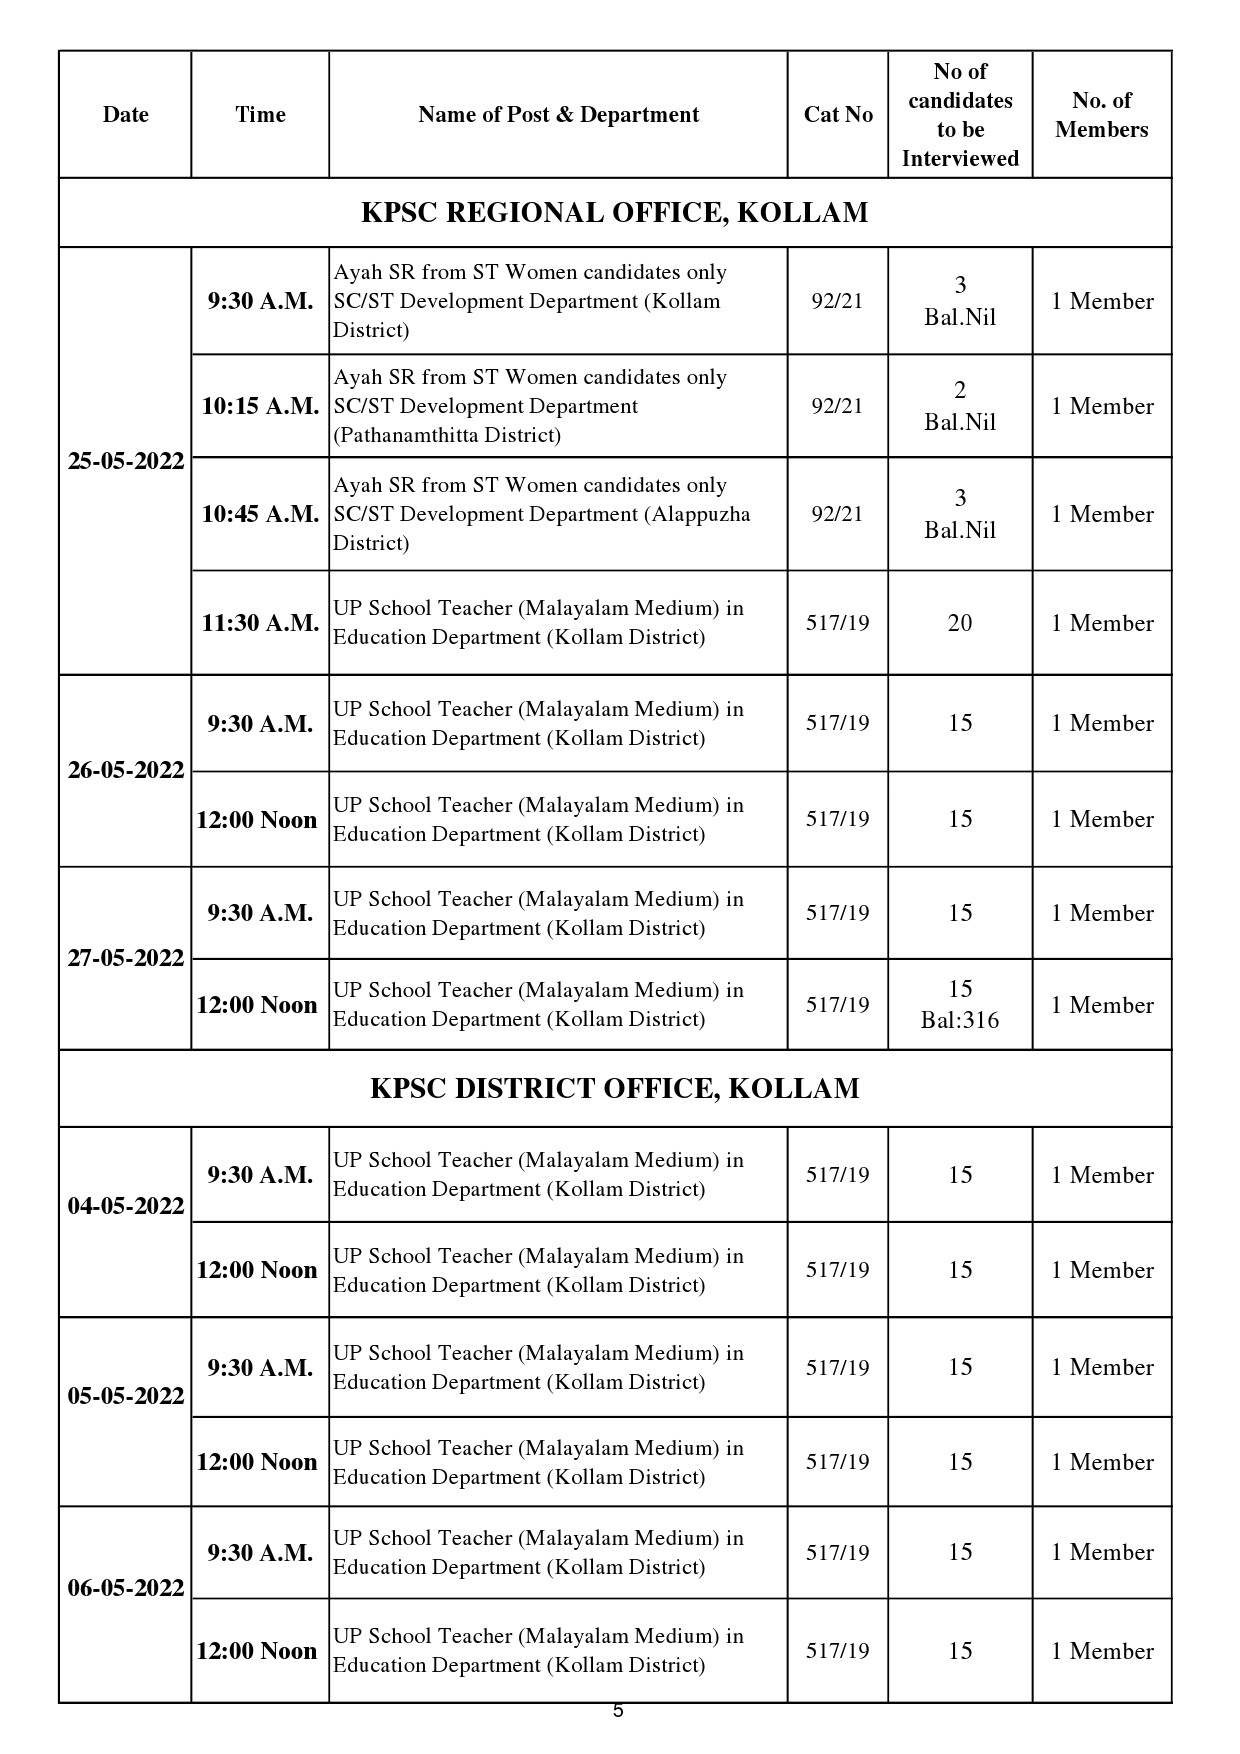 KPSC INTERVIEW PROGRAMME FOR THE MONTH OF MAY 2022 - Notification Image 5